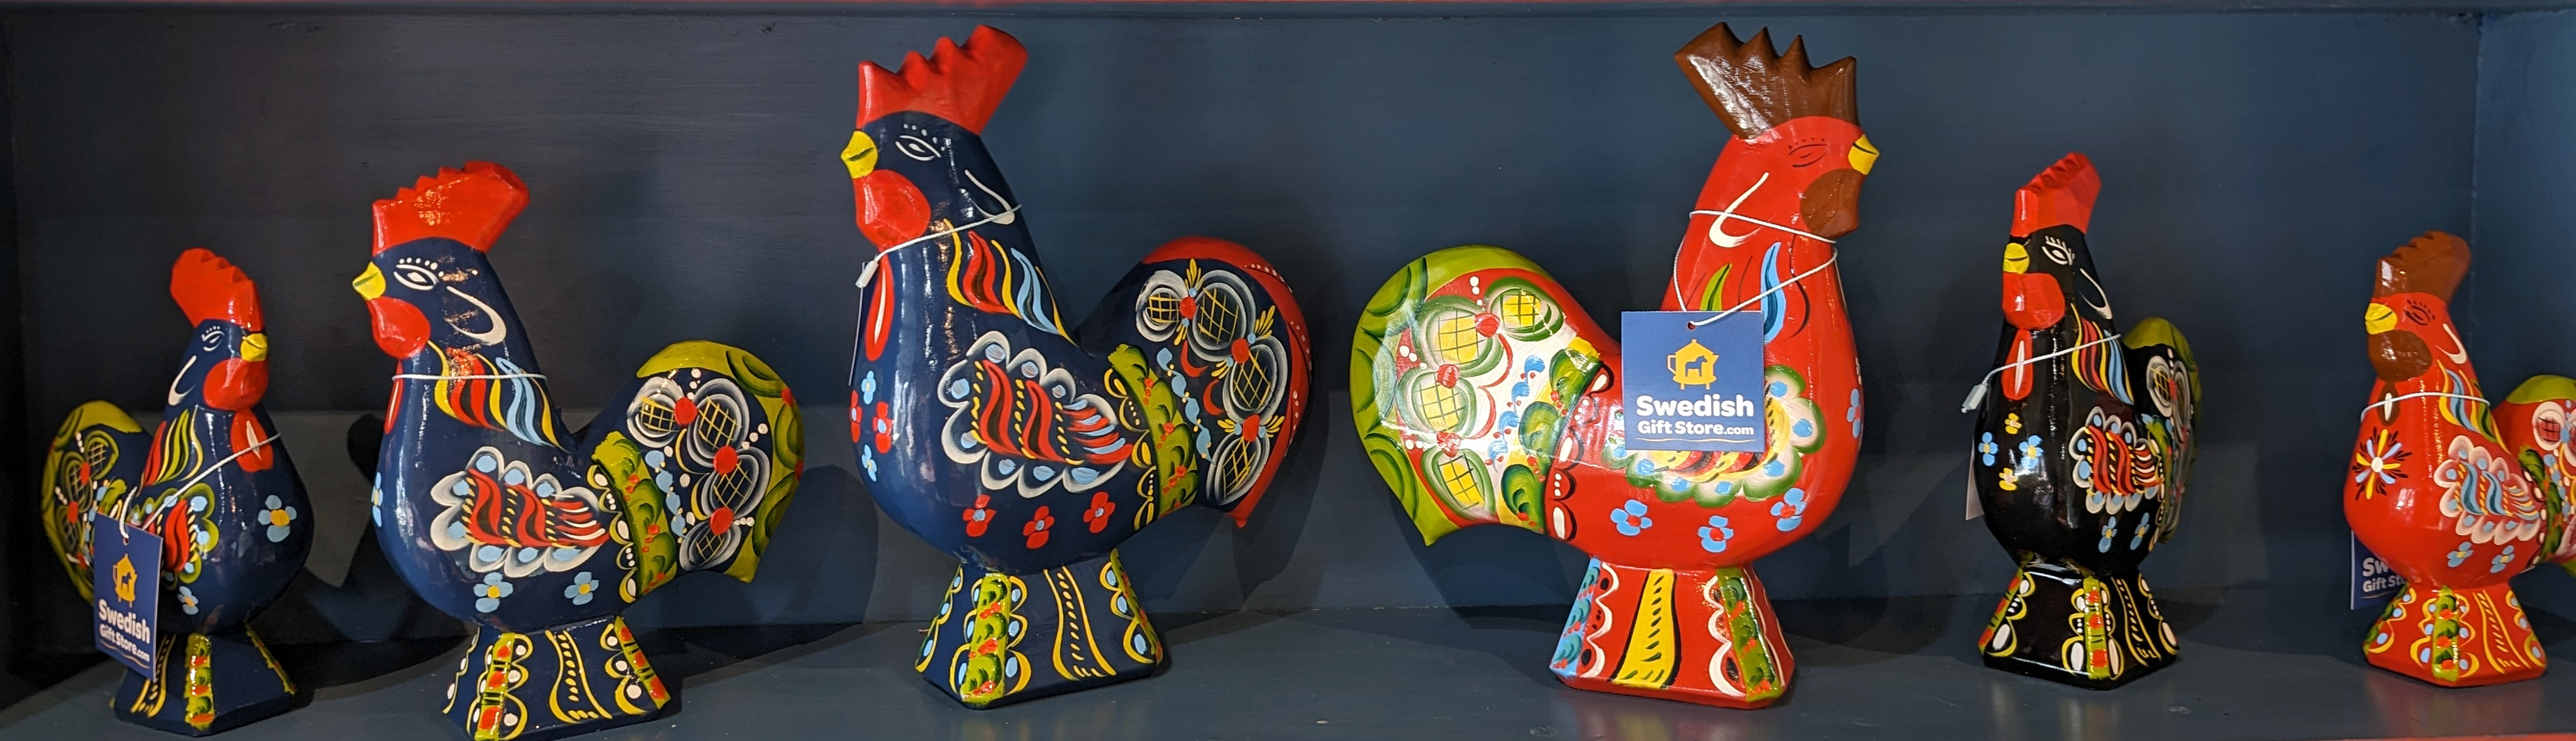 Decor: Figurines - Dala Roosters